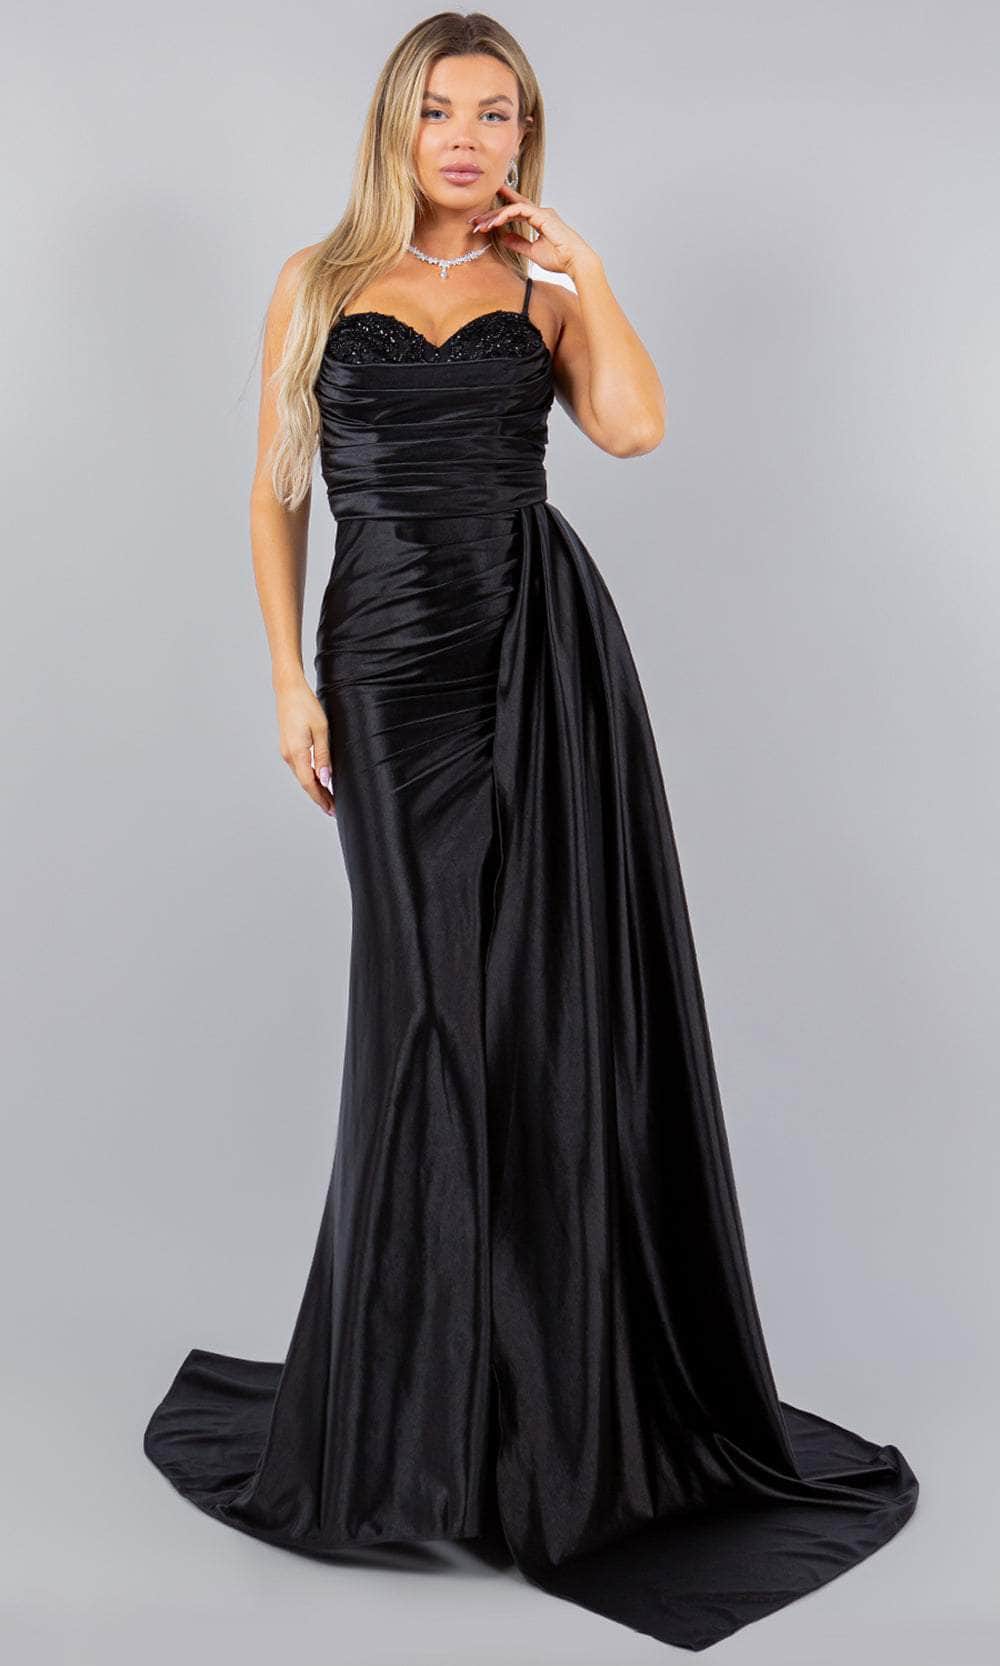 Cinderella Couture 8082J - Strapless Ruched Prom Gown Special Occasion Dress